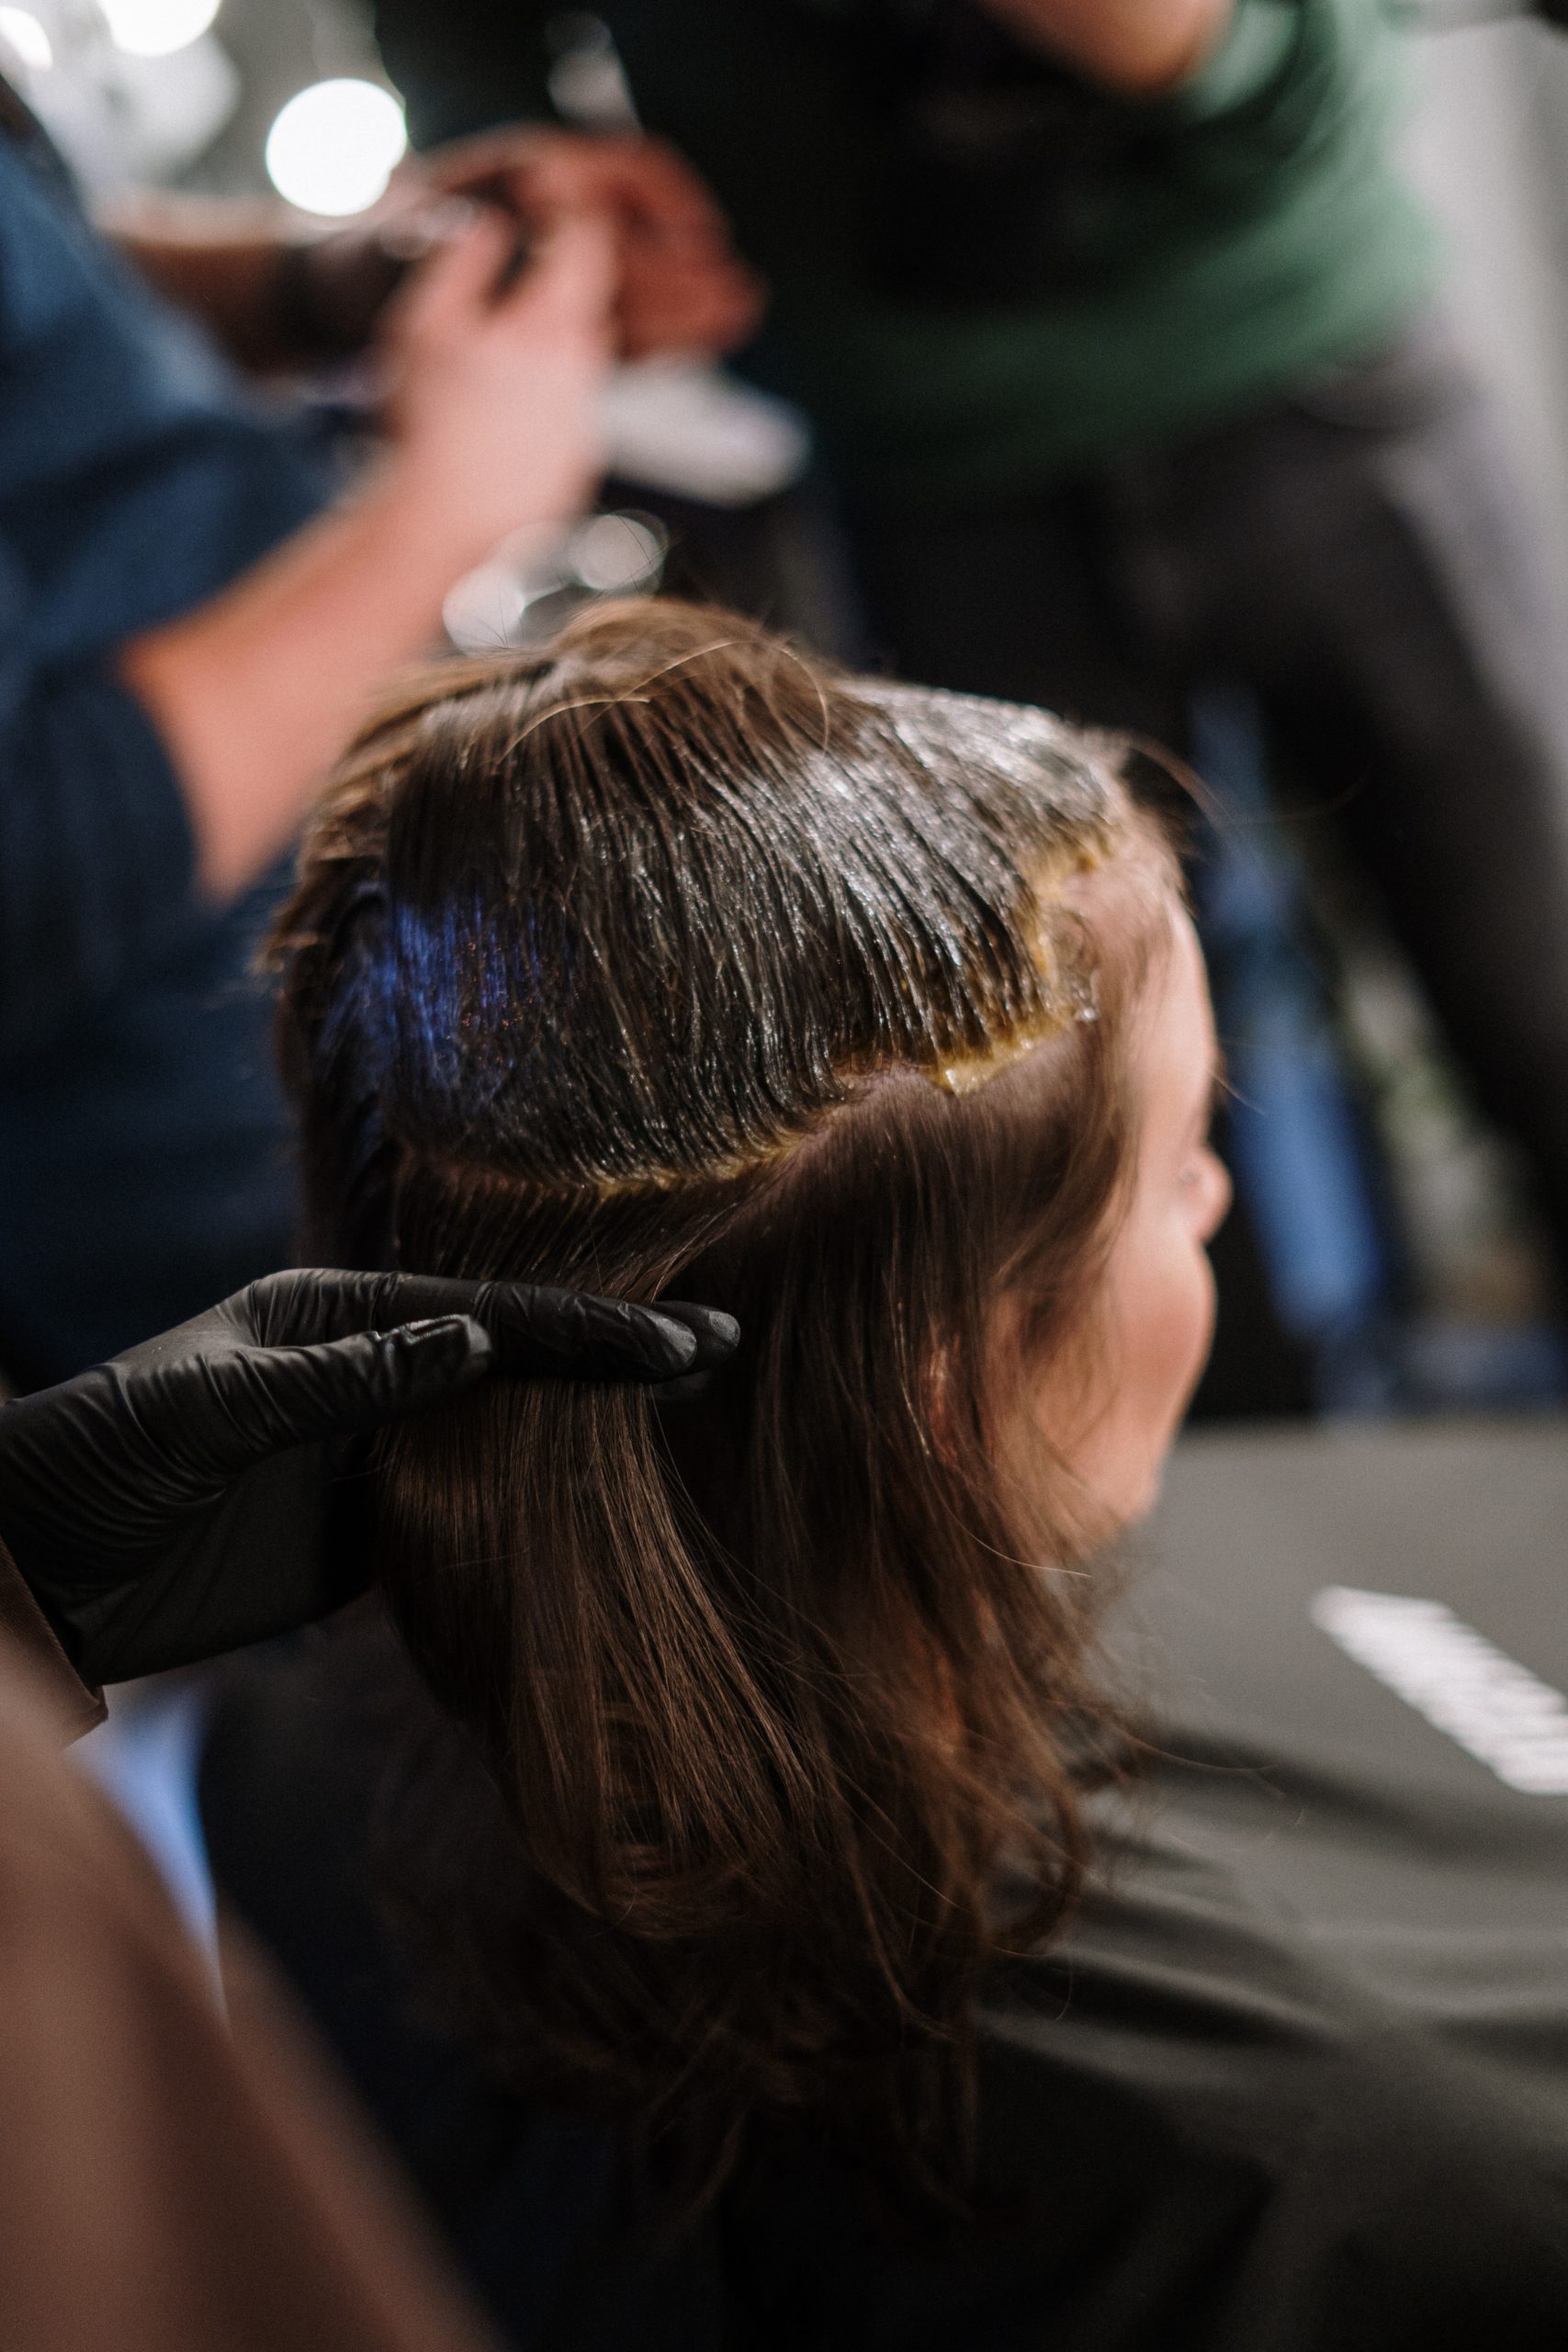 Why Box Hair Dye is Bad for your Hair